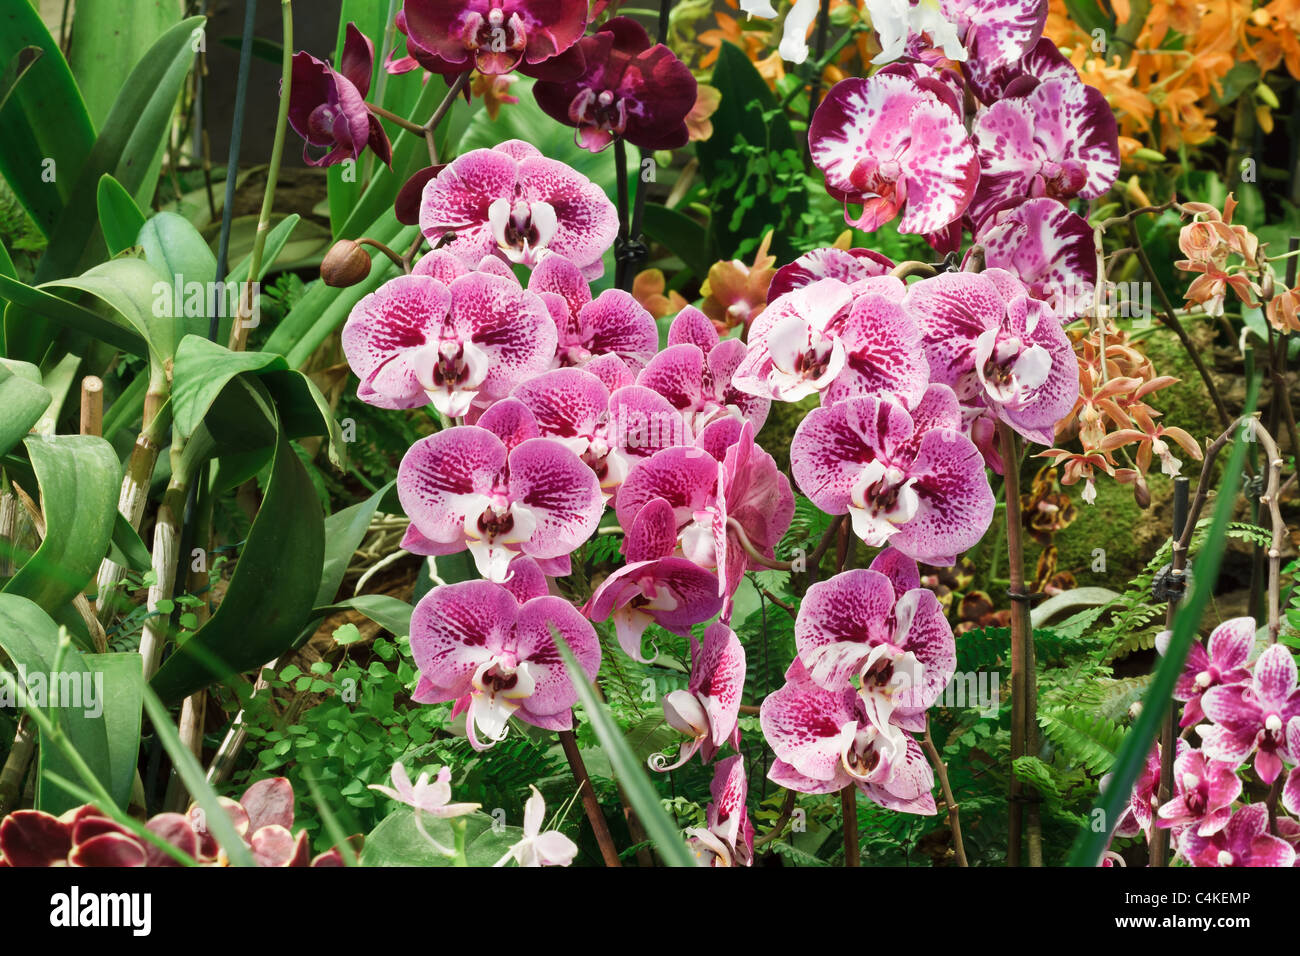 group of pink and purple Phalaenopsis orchid flowers between foliage Stock Photo